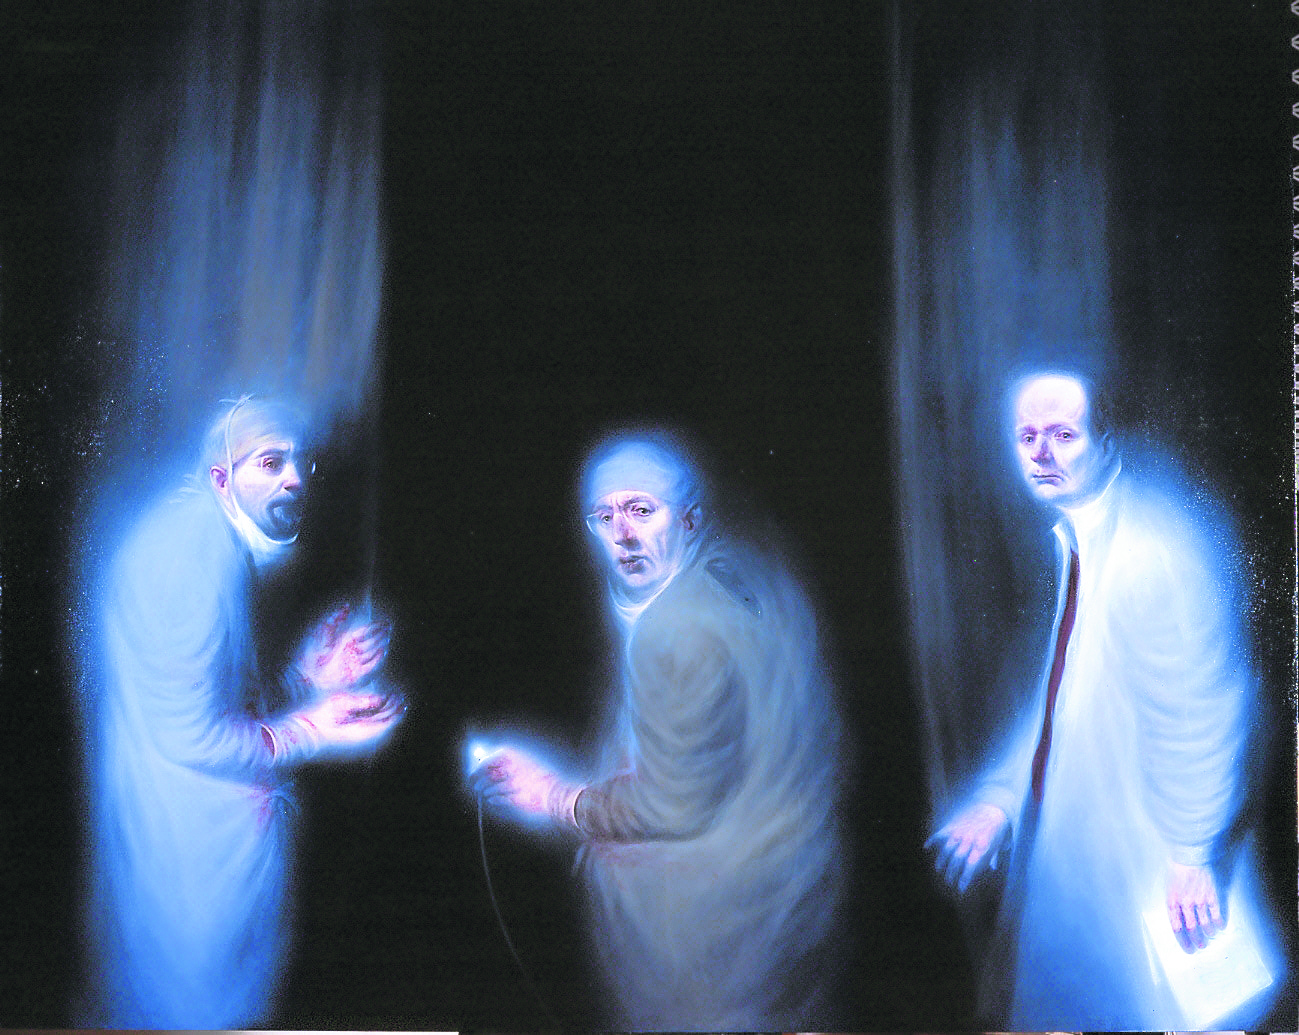 Professors Robert Steele, Alfred Cuschieri and Sir David Lane are ghostly figures in The Three Oncologists, Ken Currie’s painting expressing the horrors of cancer